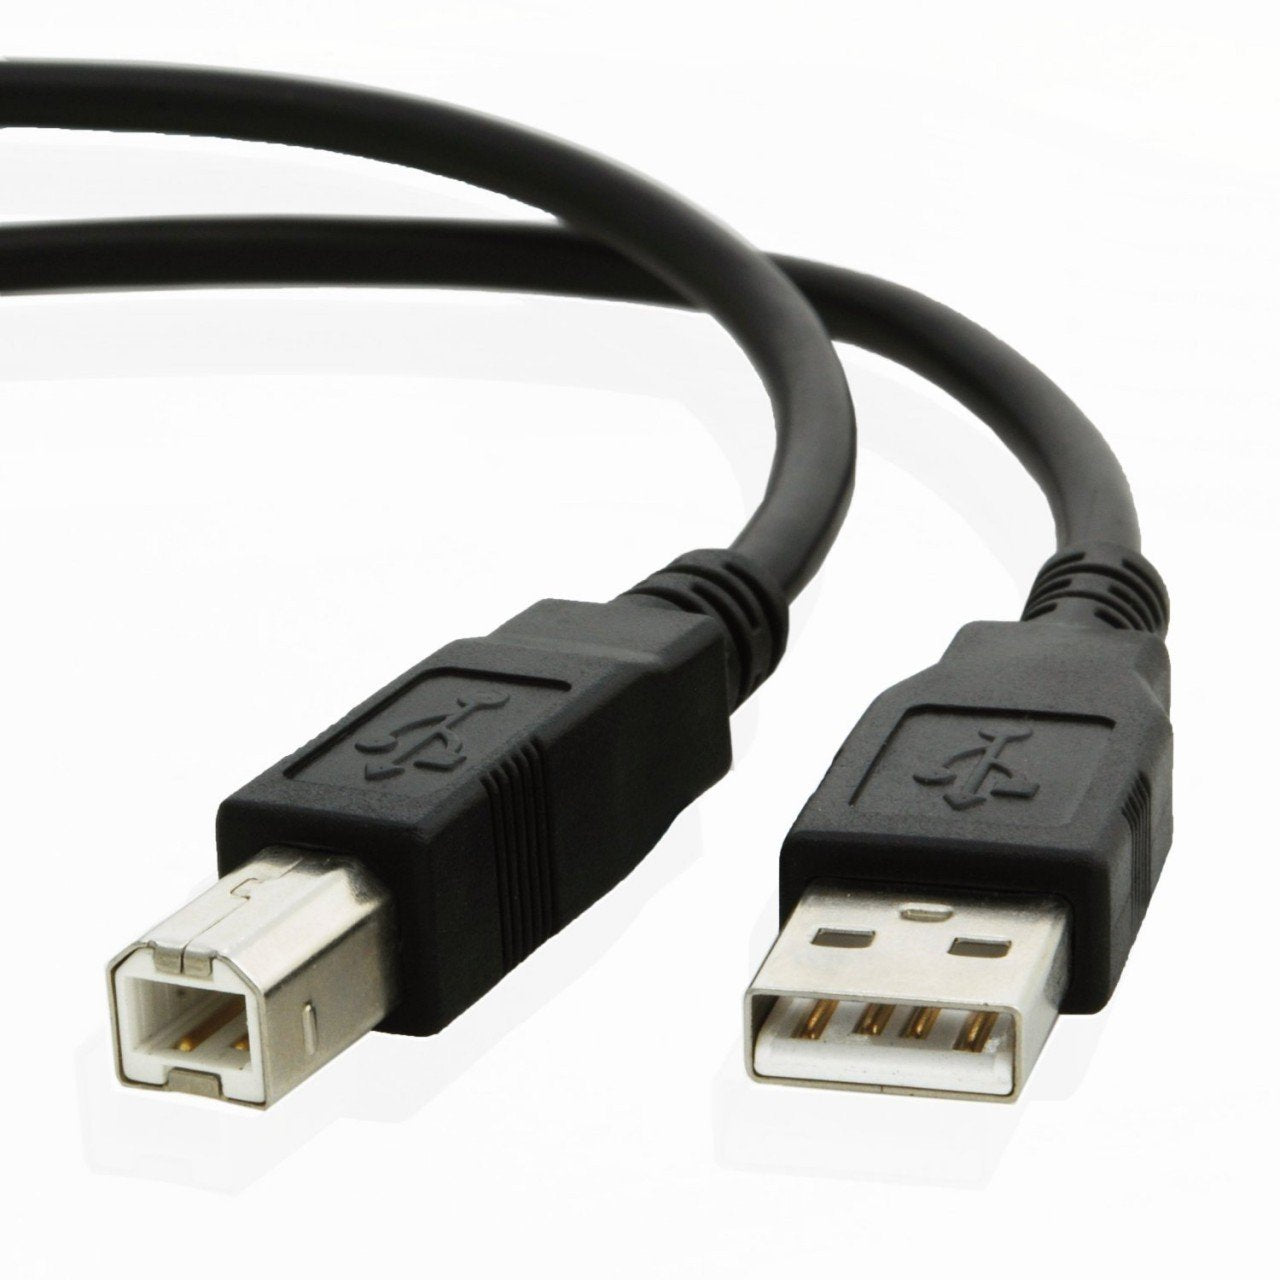 USB cable for Epson PERFECTION V370